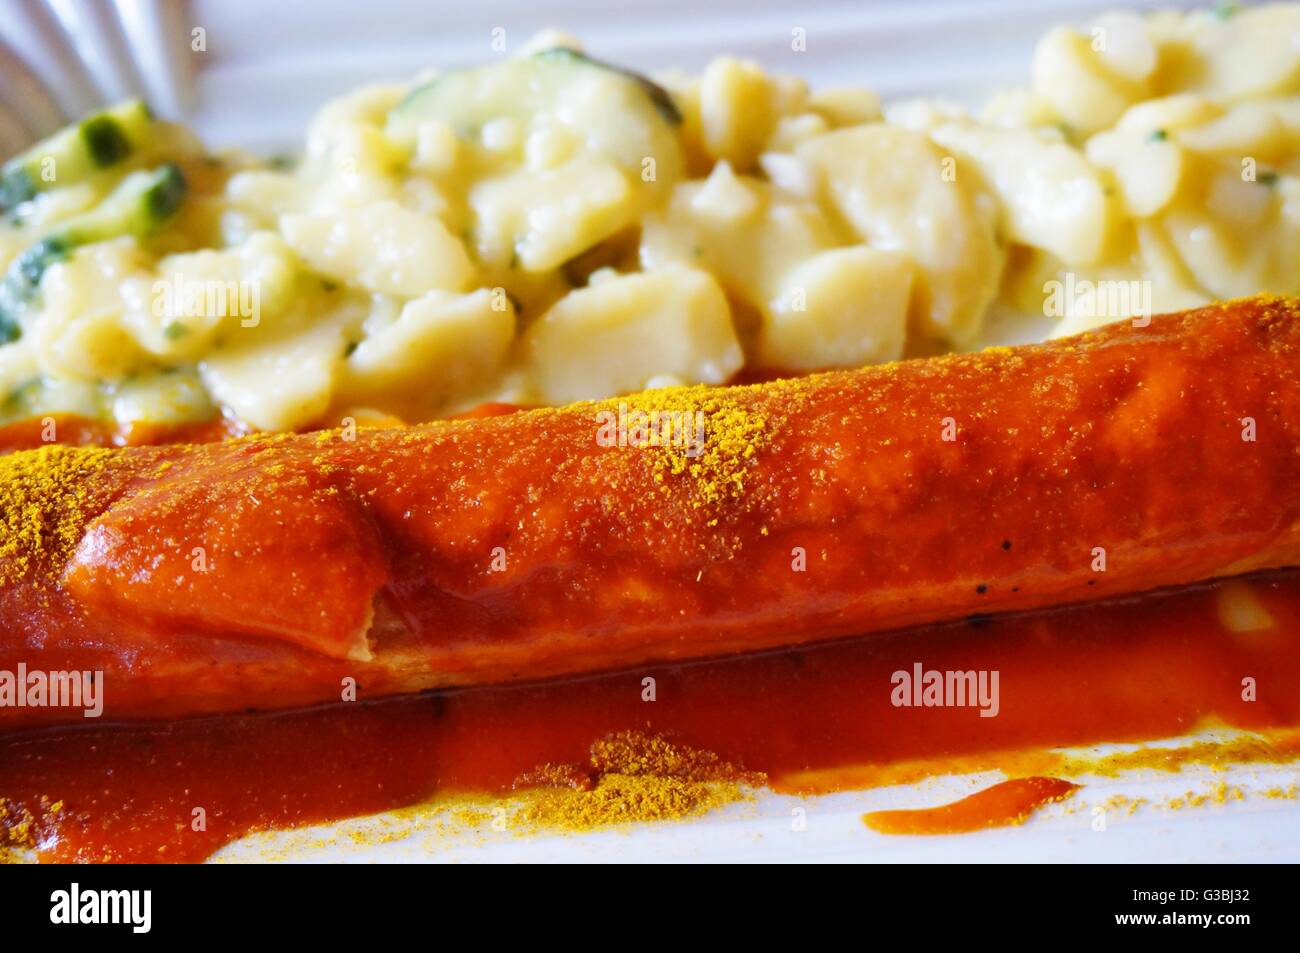 A curry wurst sausage in Berlin Stock Photo